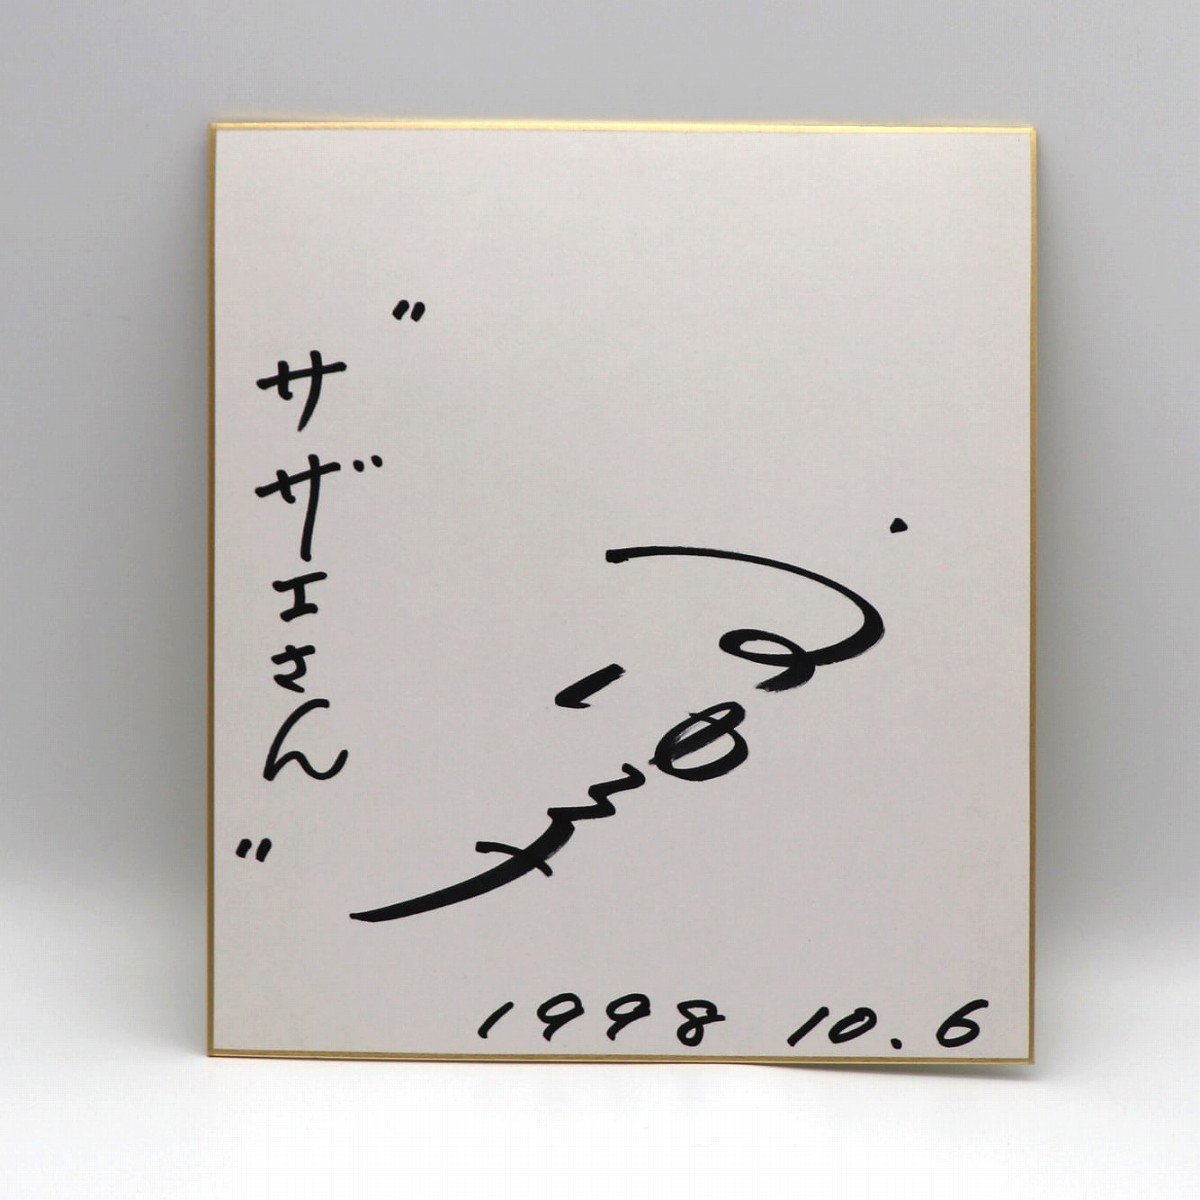 Yuko Uno･Signed colored paper･Handwritten･Sazae-san theme song･No.200902-037･Package size 60, Talent goods, sign